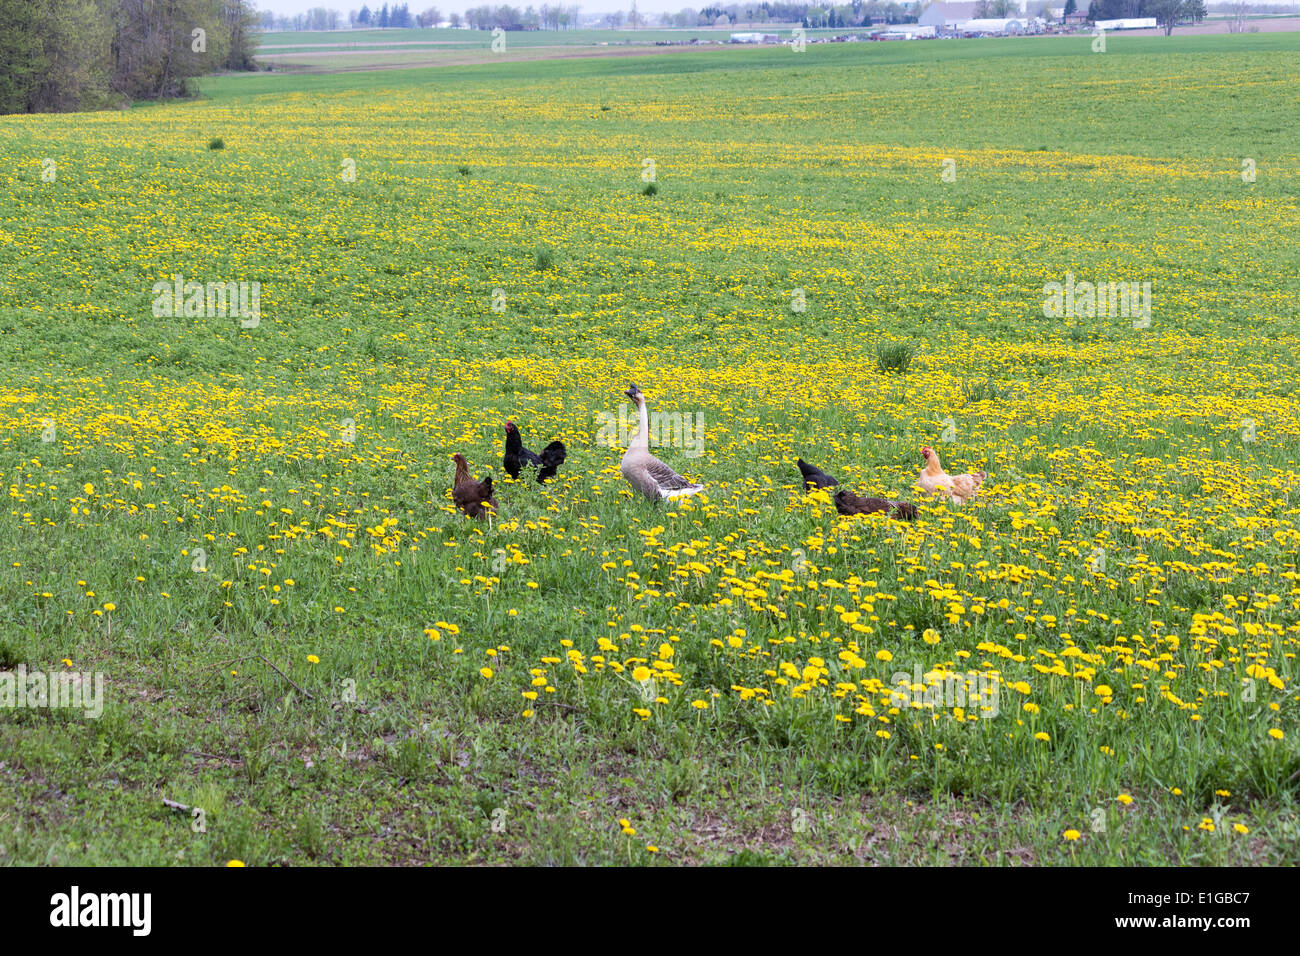 A goose and five chickens strolling through a green field and dandelions Stock Photo